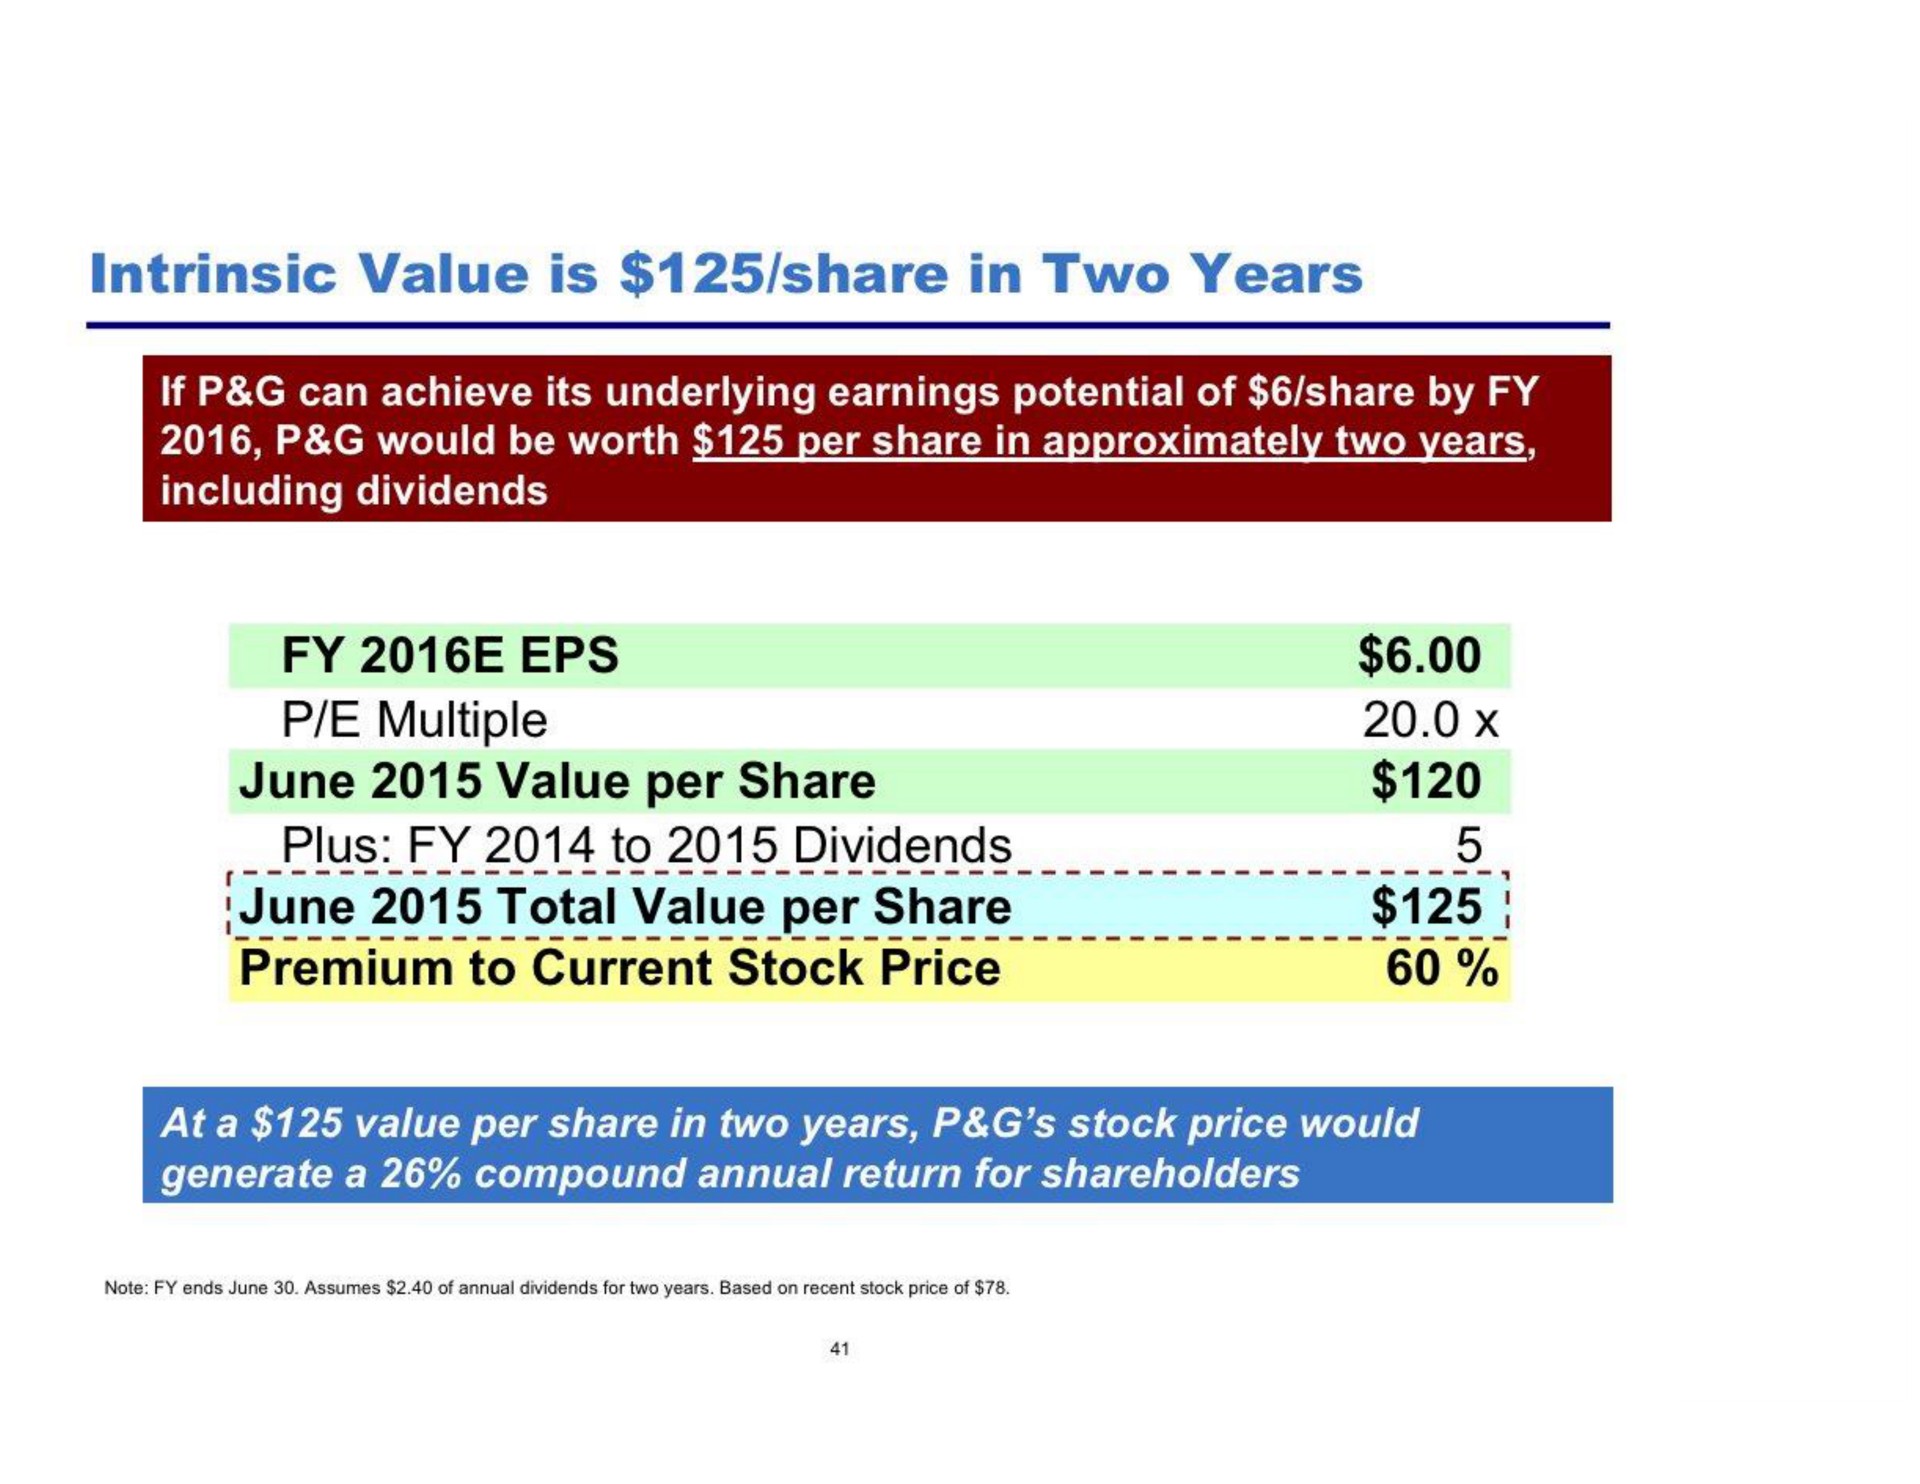 intrinsic value is share in two years multiple june value per share plus to dividends june total value premium to current stock price | Pershing Square